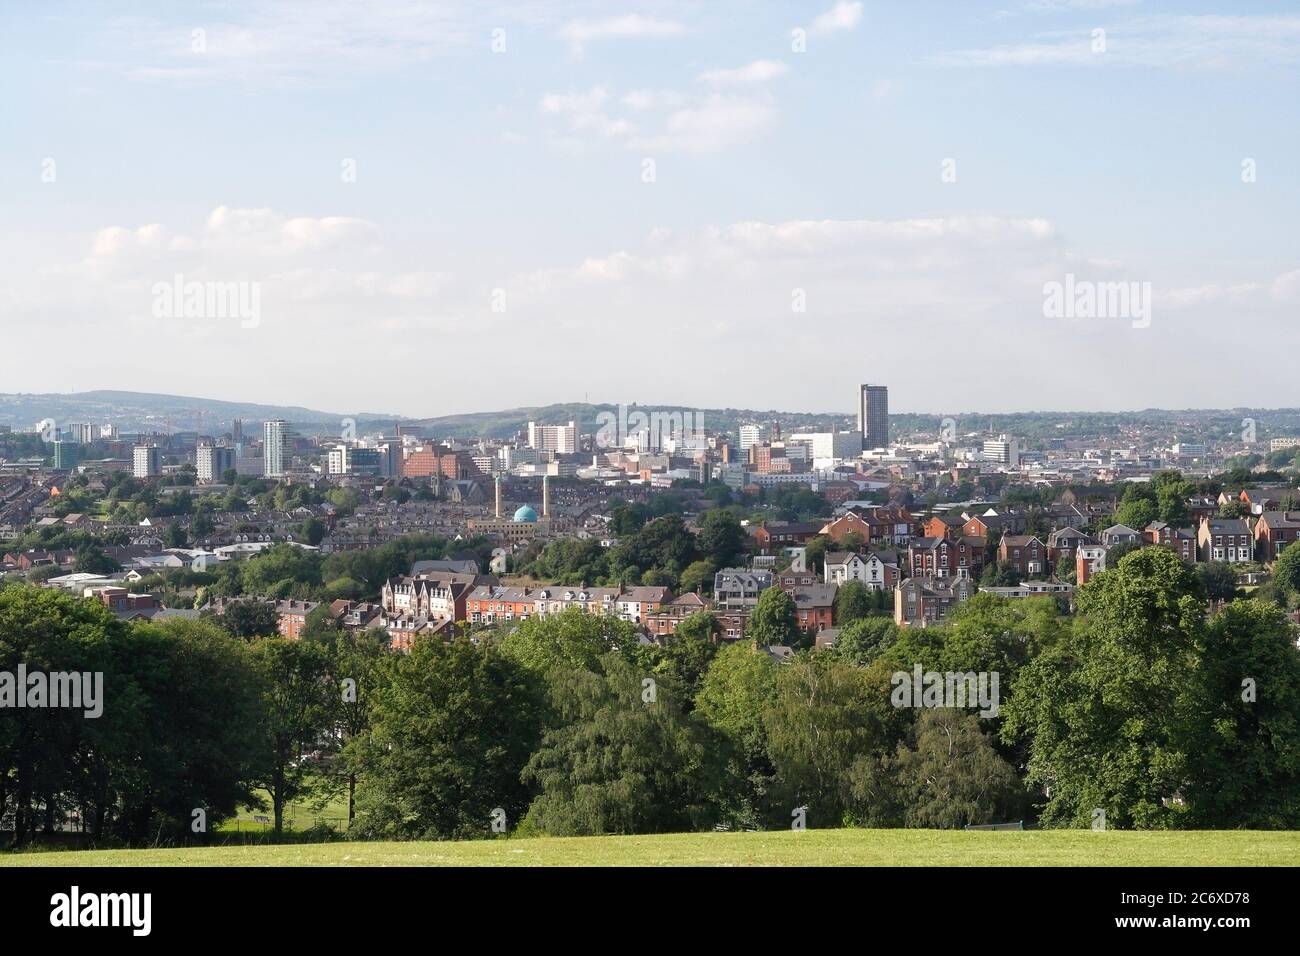 Skyline view of Sheffield city from Meersbrook Park, England UK, Urban landscape Greenest city Stock Photo